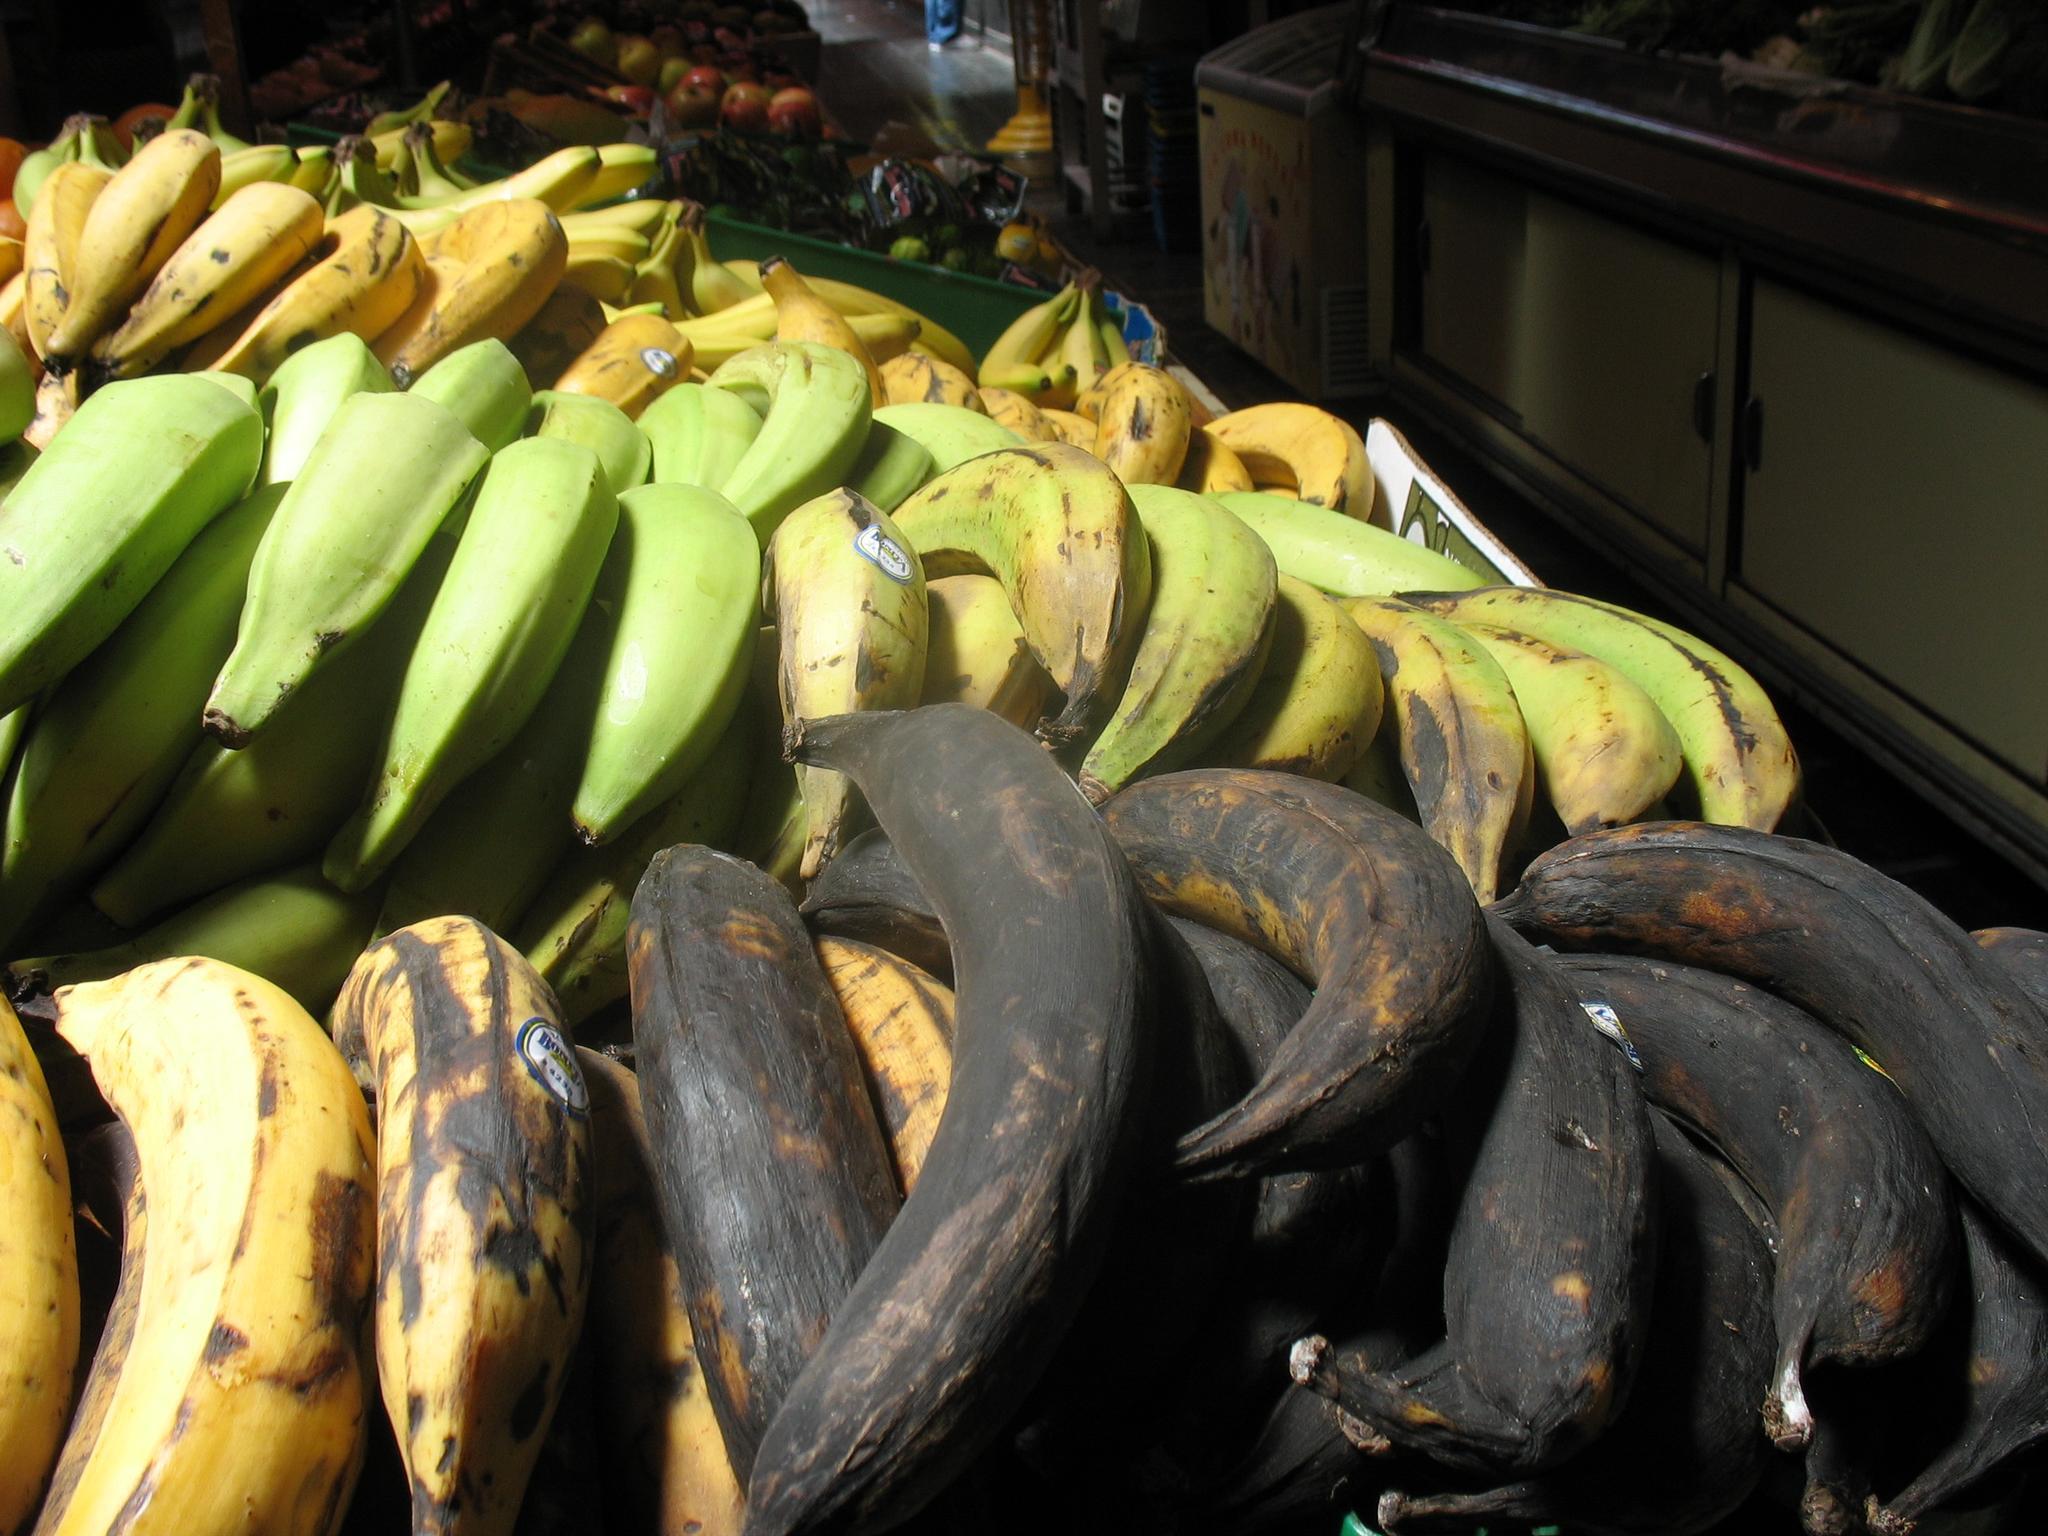 several bunches of bananas sitting in a market